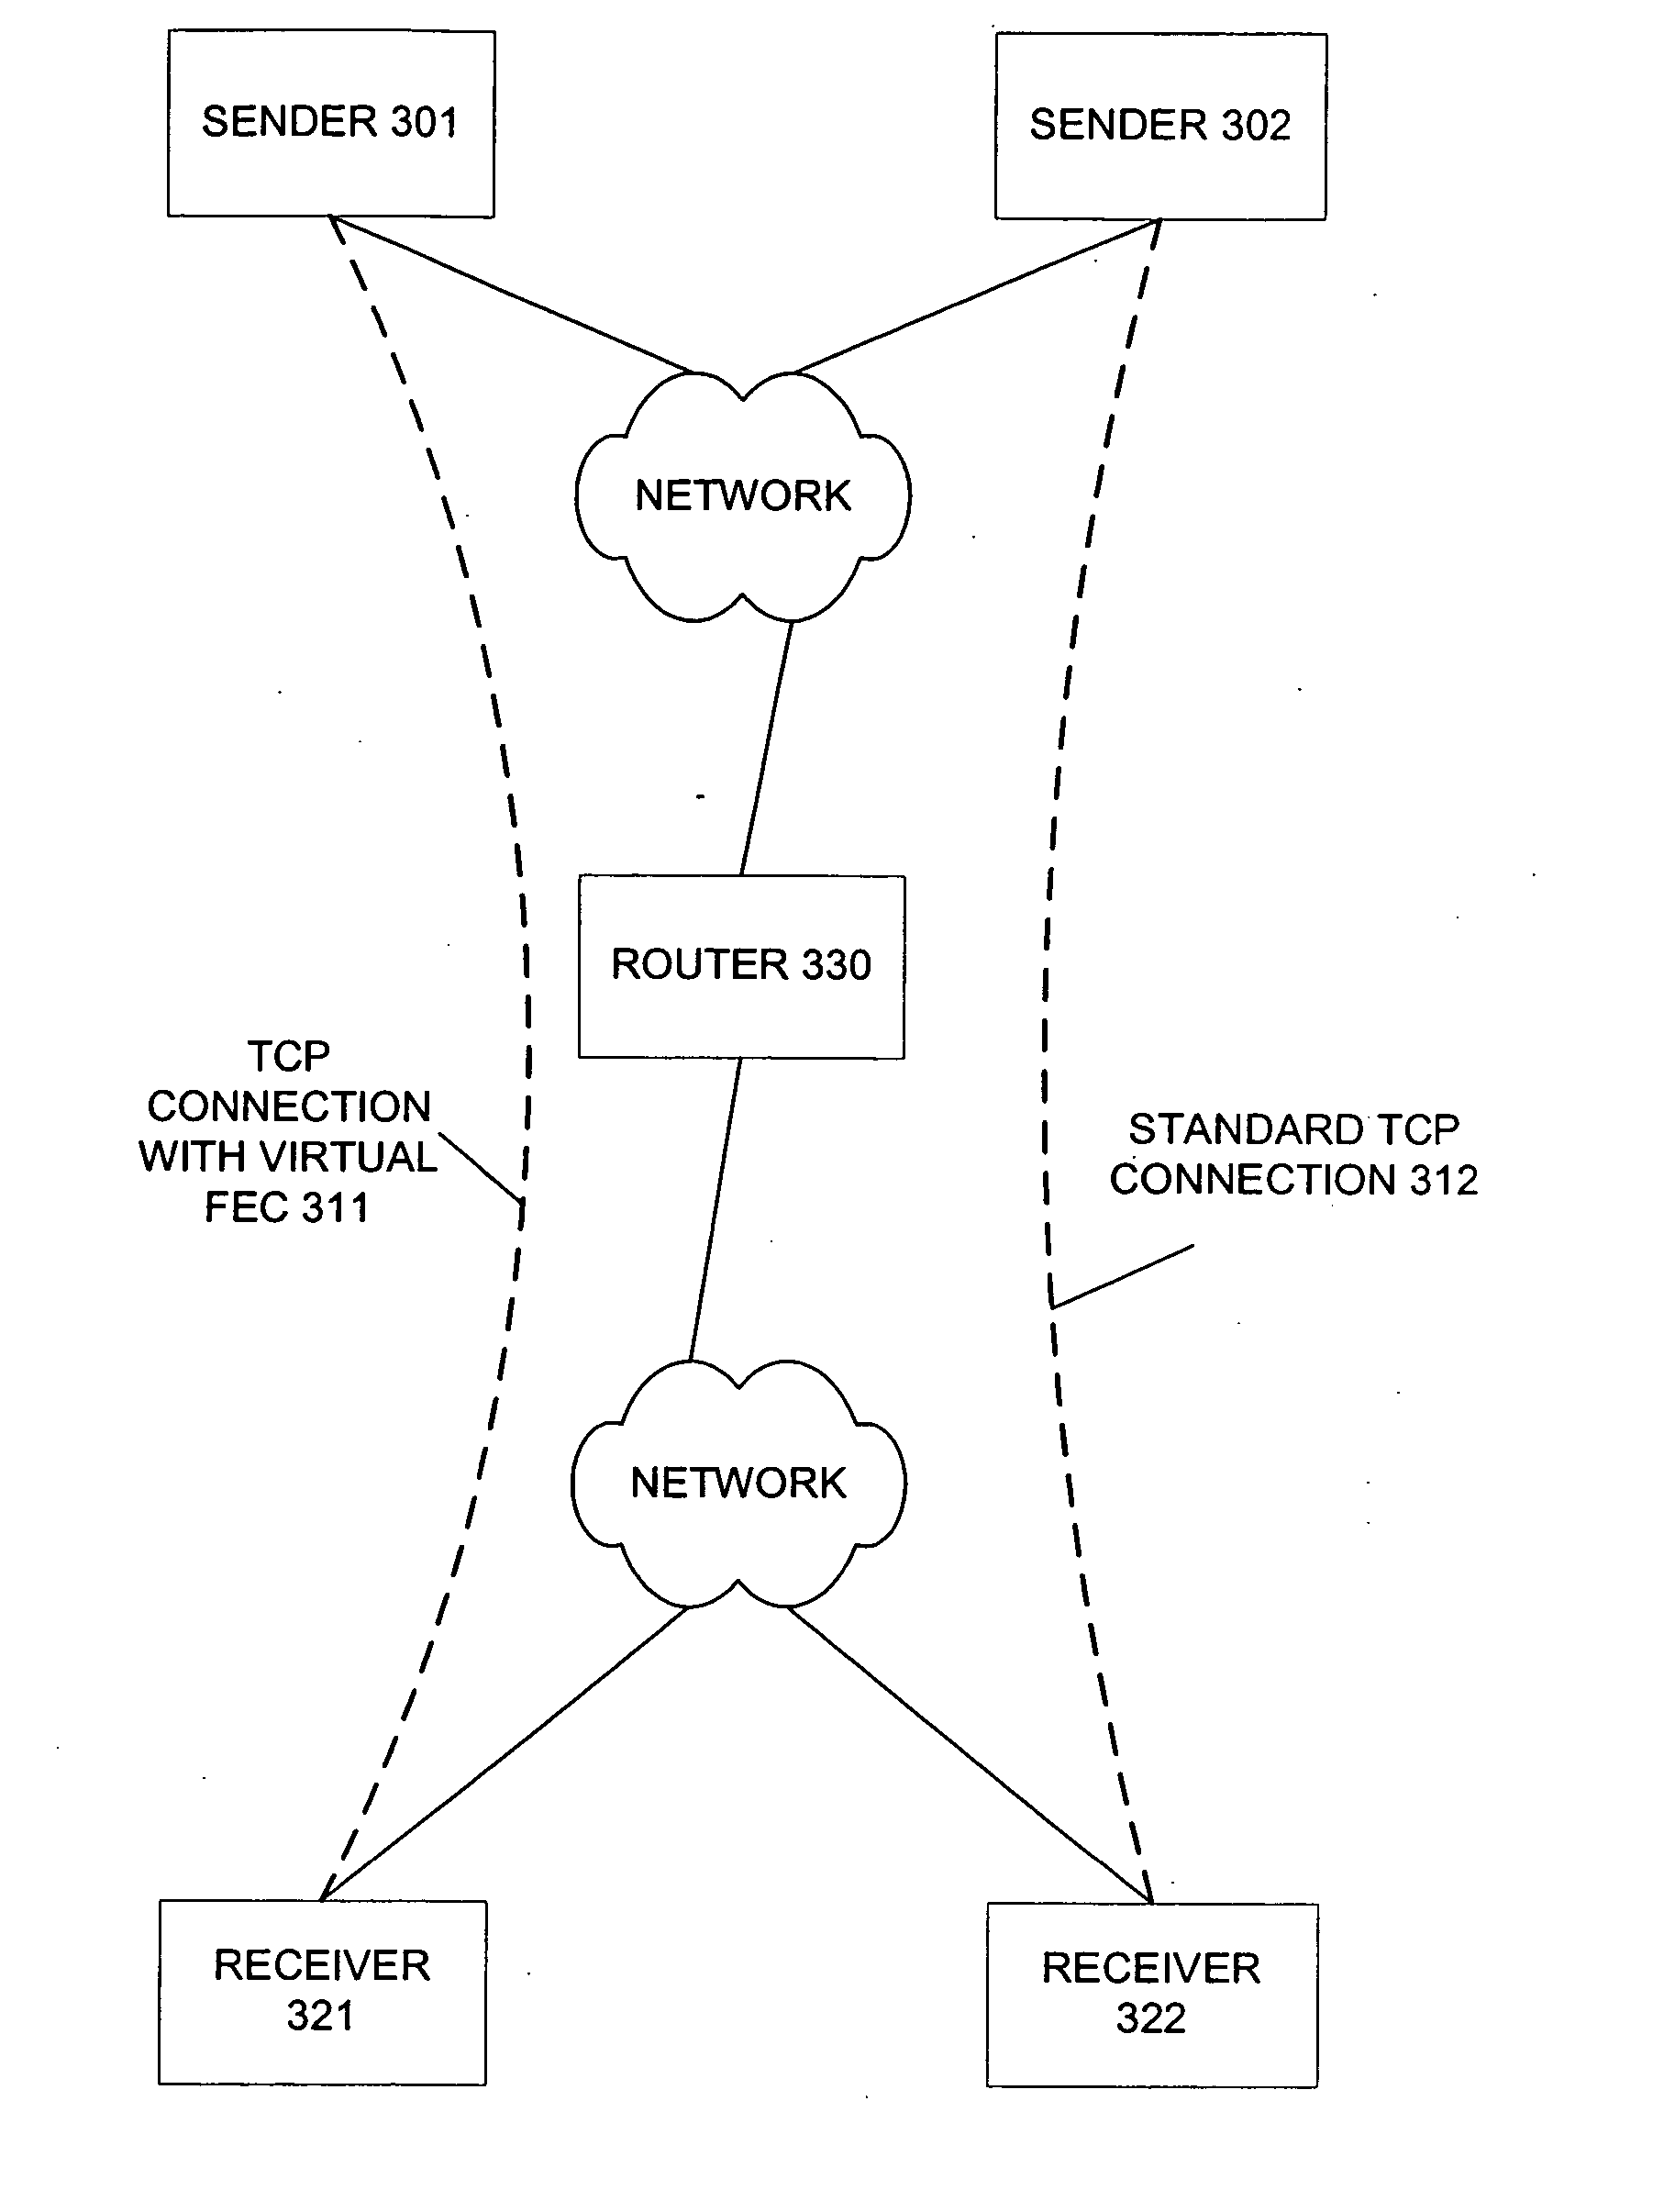 Congestion management over lossy network connections